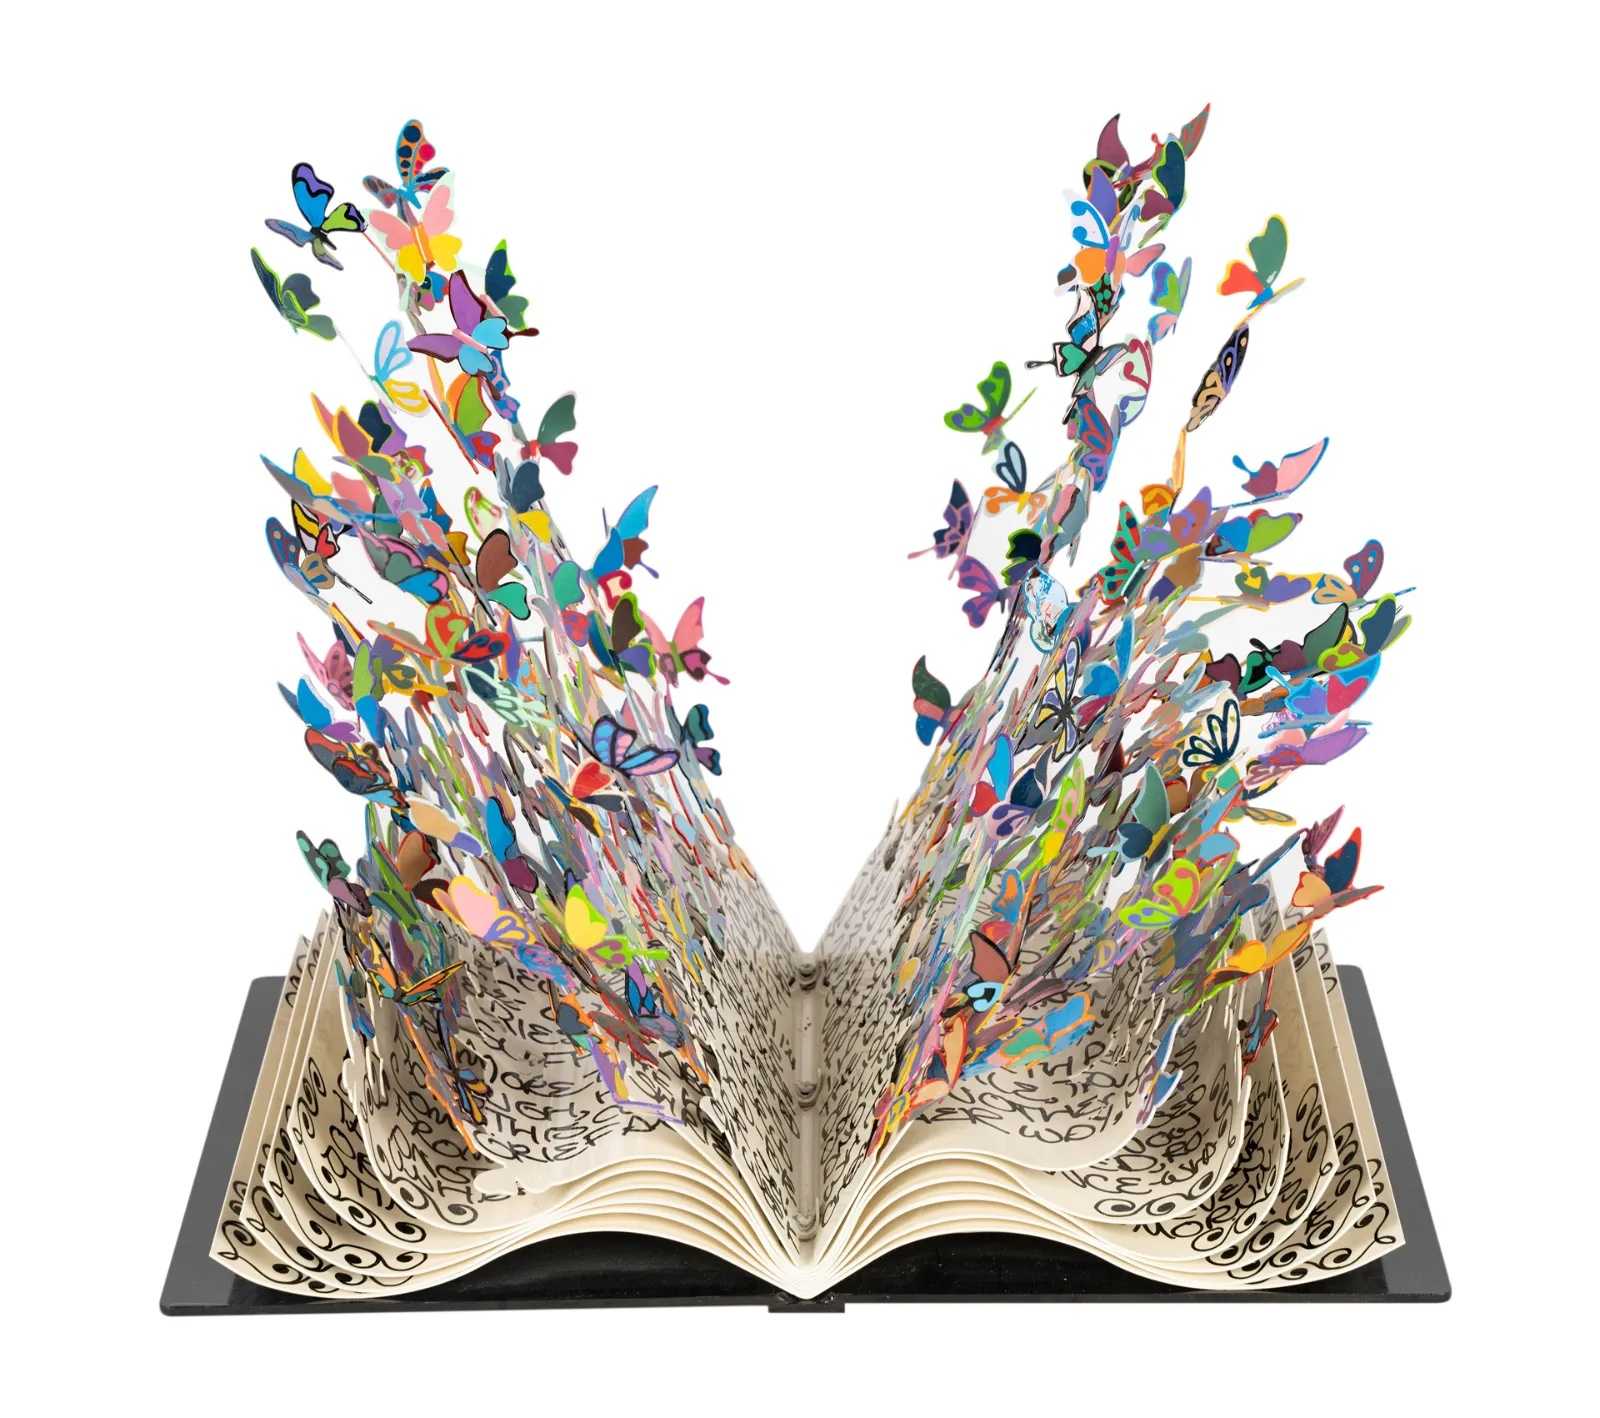 David Kracov’s ‘Book of Life” sculpture, which sold for $24,320 with buyer’s premium at Abell Auction on April 4.